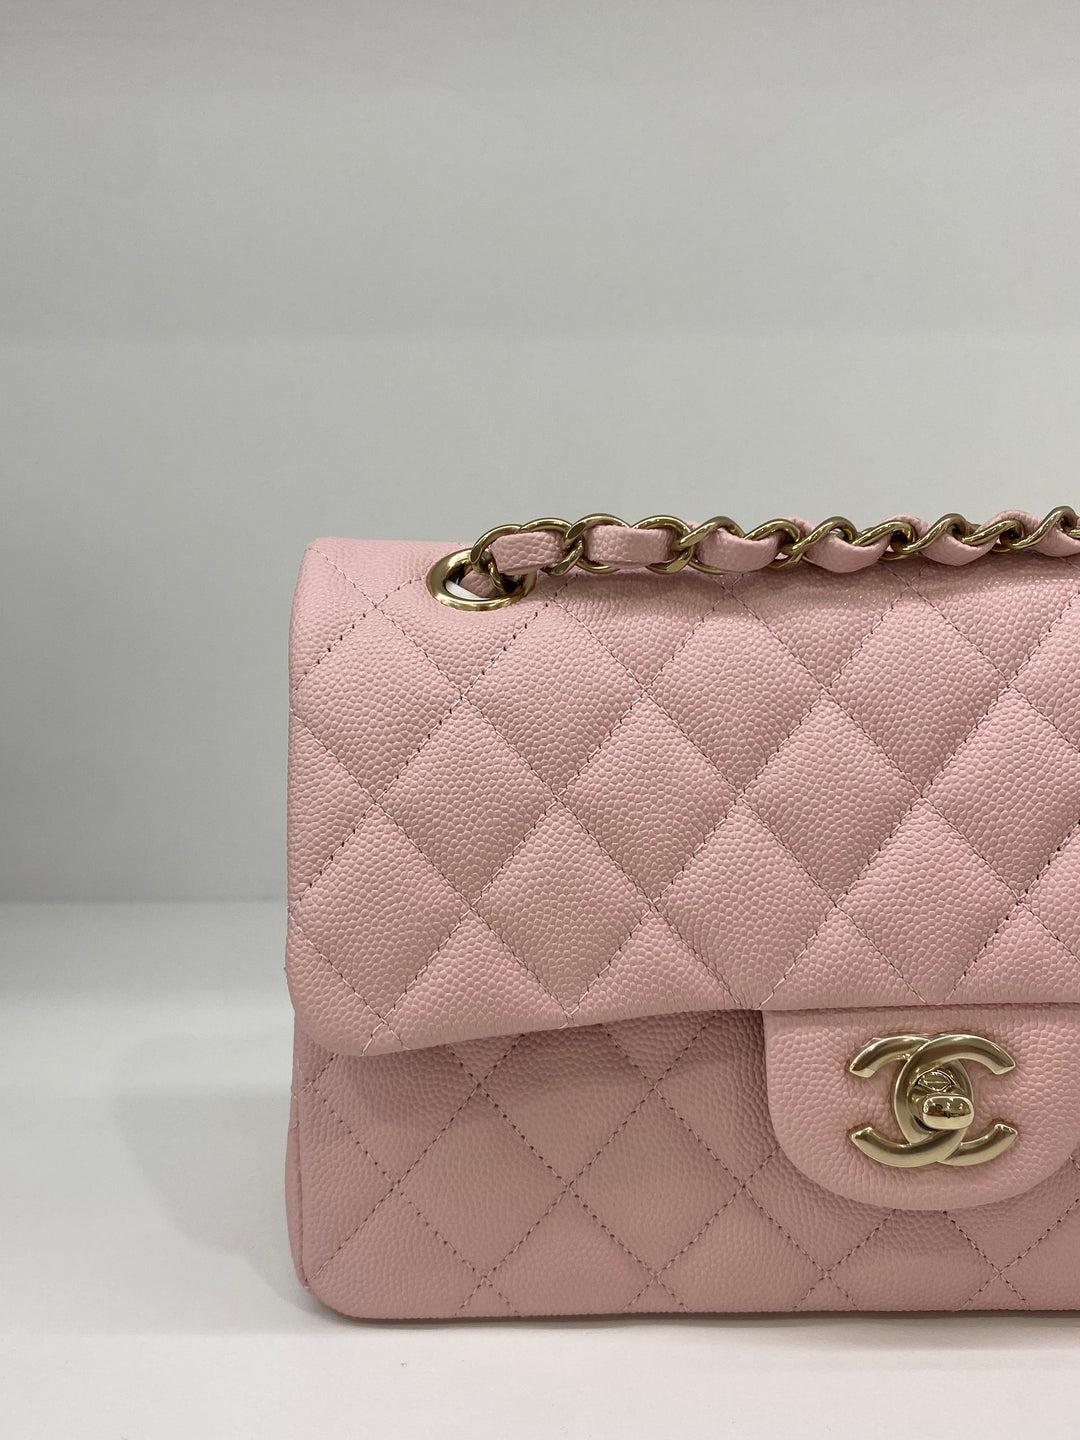 Chanel Classic Flap Small Soft Pink CGHW In Excellent Condition For Sale In Double Bay, AU